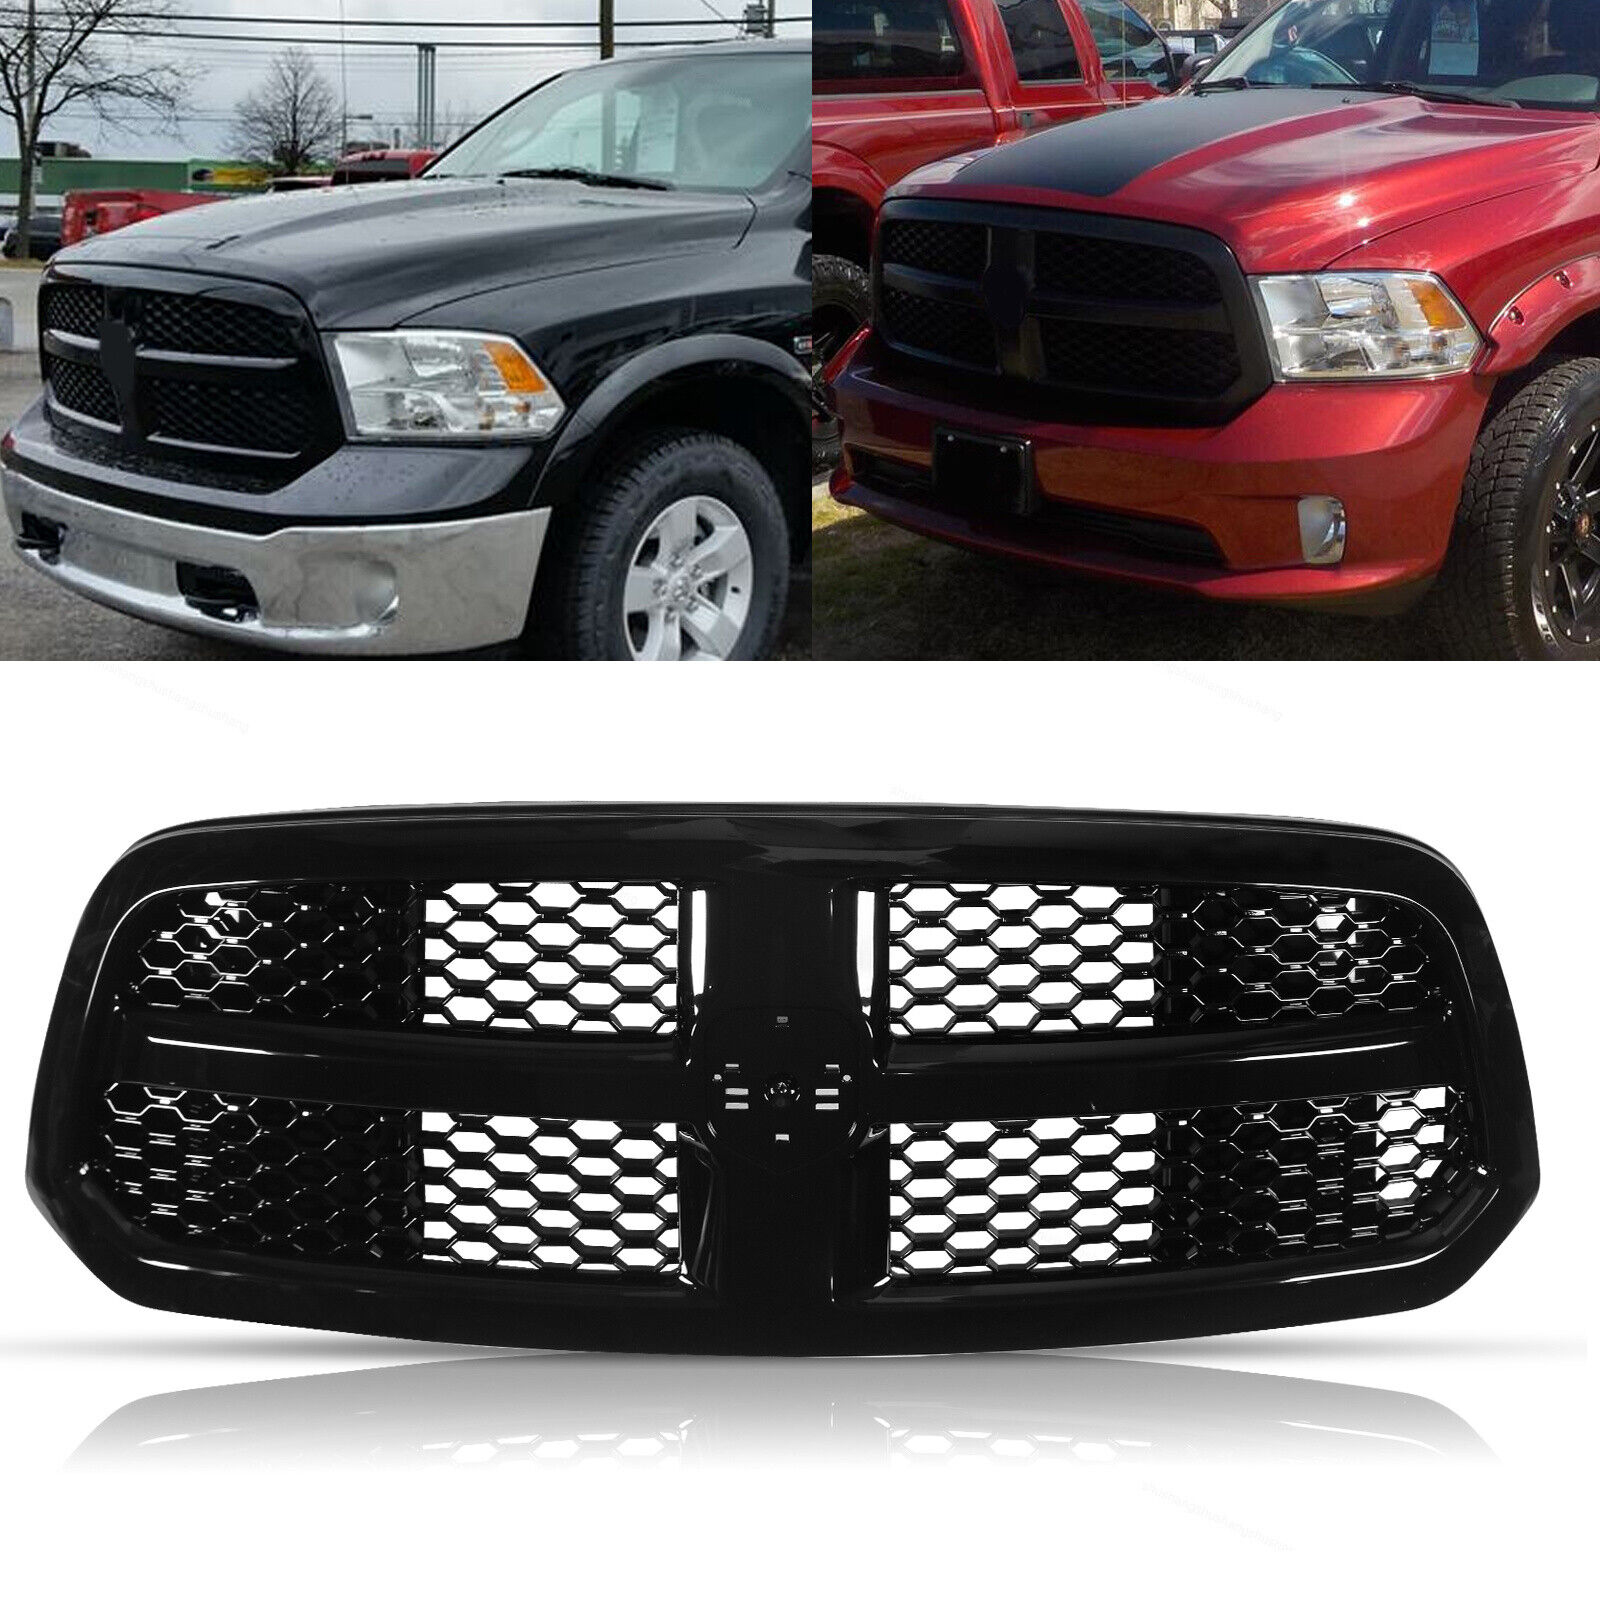 Replace Front Bumper For 2013-2018 Dodge Ram 1500 Upper Glossy Black Grille